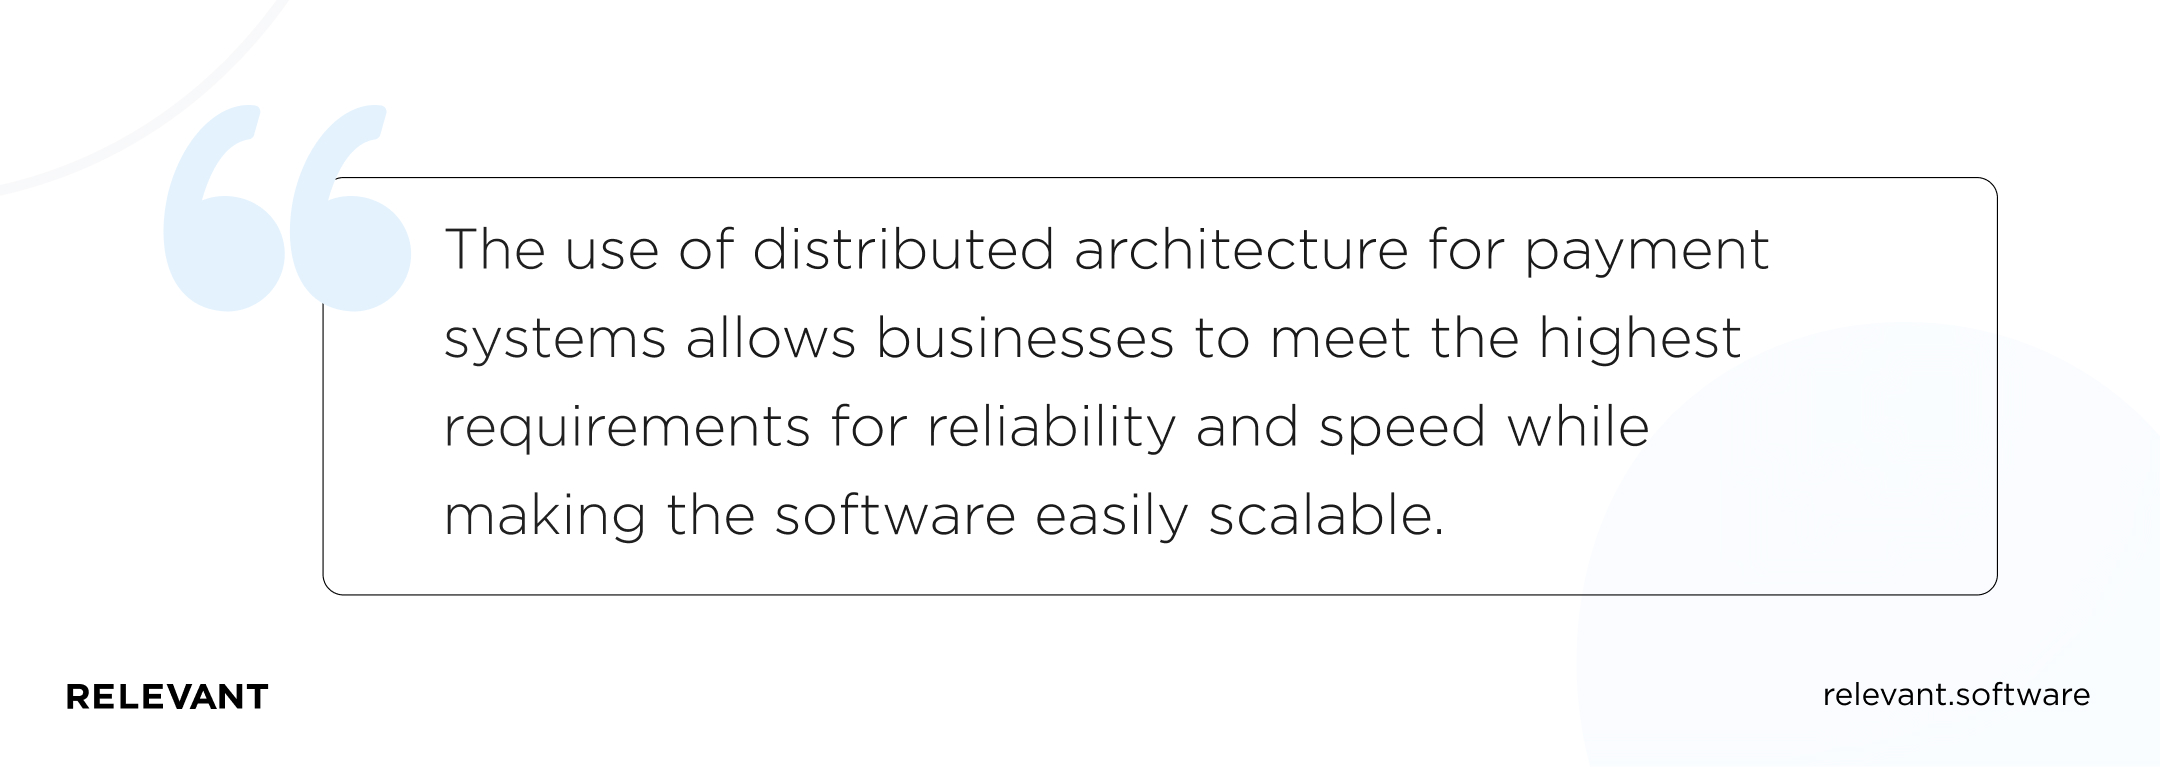 The use of distributed architecture for payment systems allows businesses to meet the highest requirements for reliability and speed while making the software easily scalable.